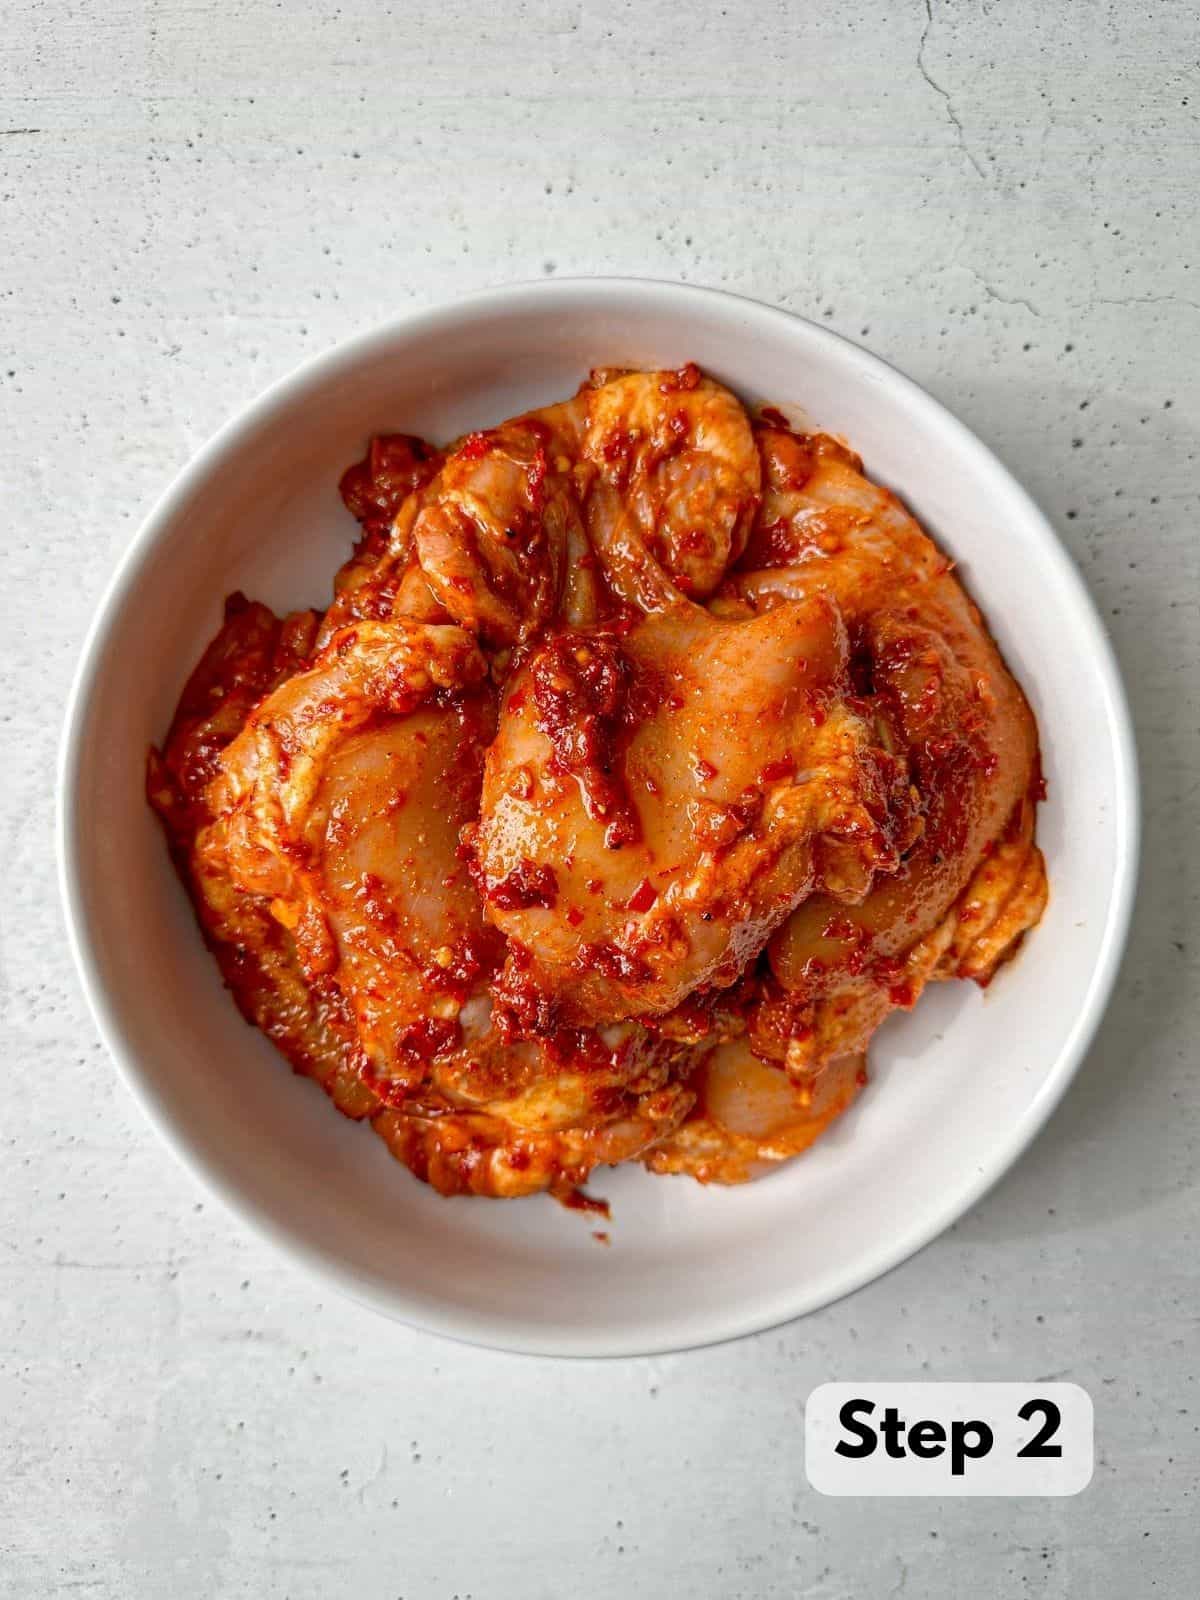 Chicken thighs coated in a red-orange harissa marinade in a white bowl.